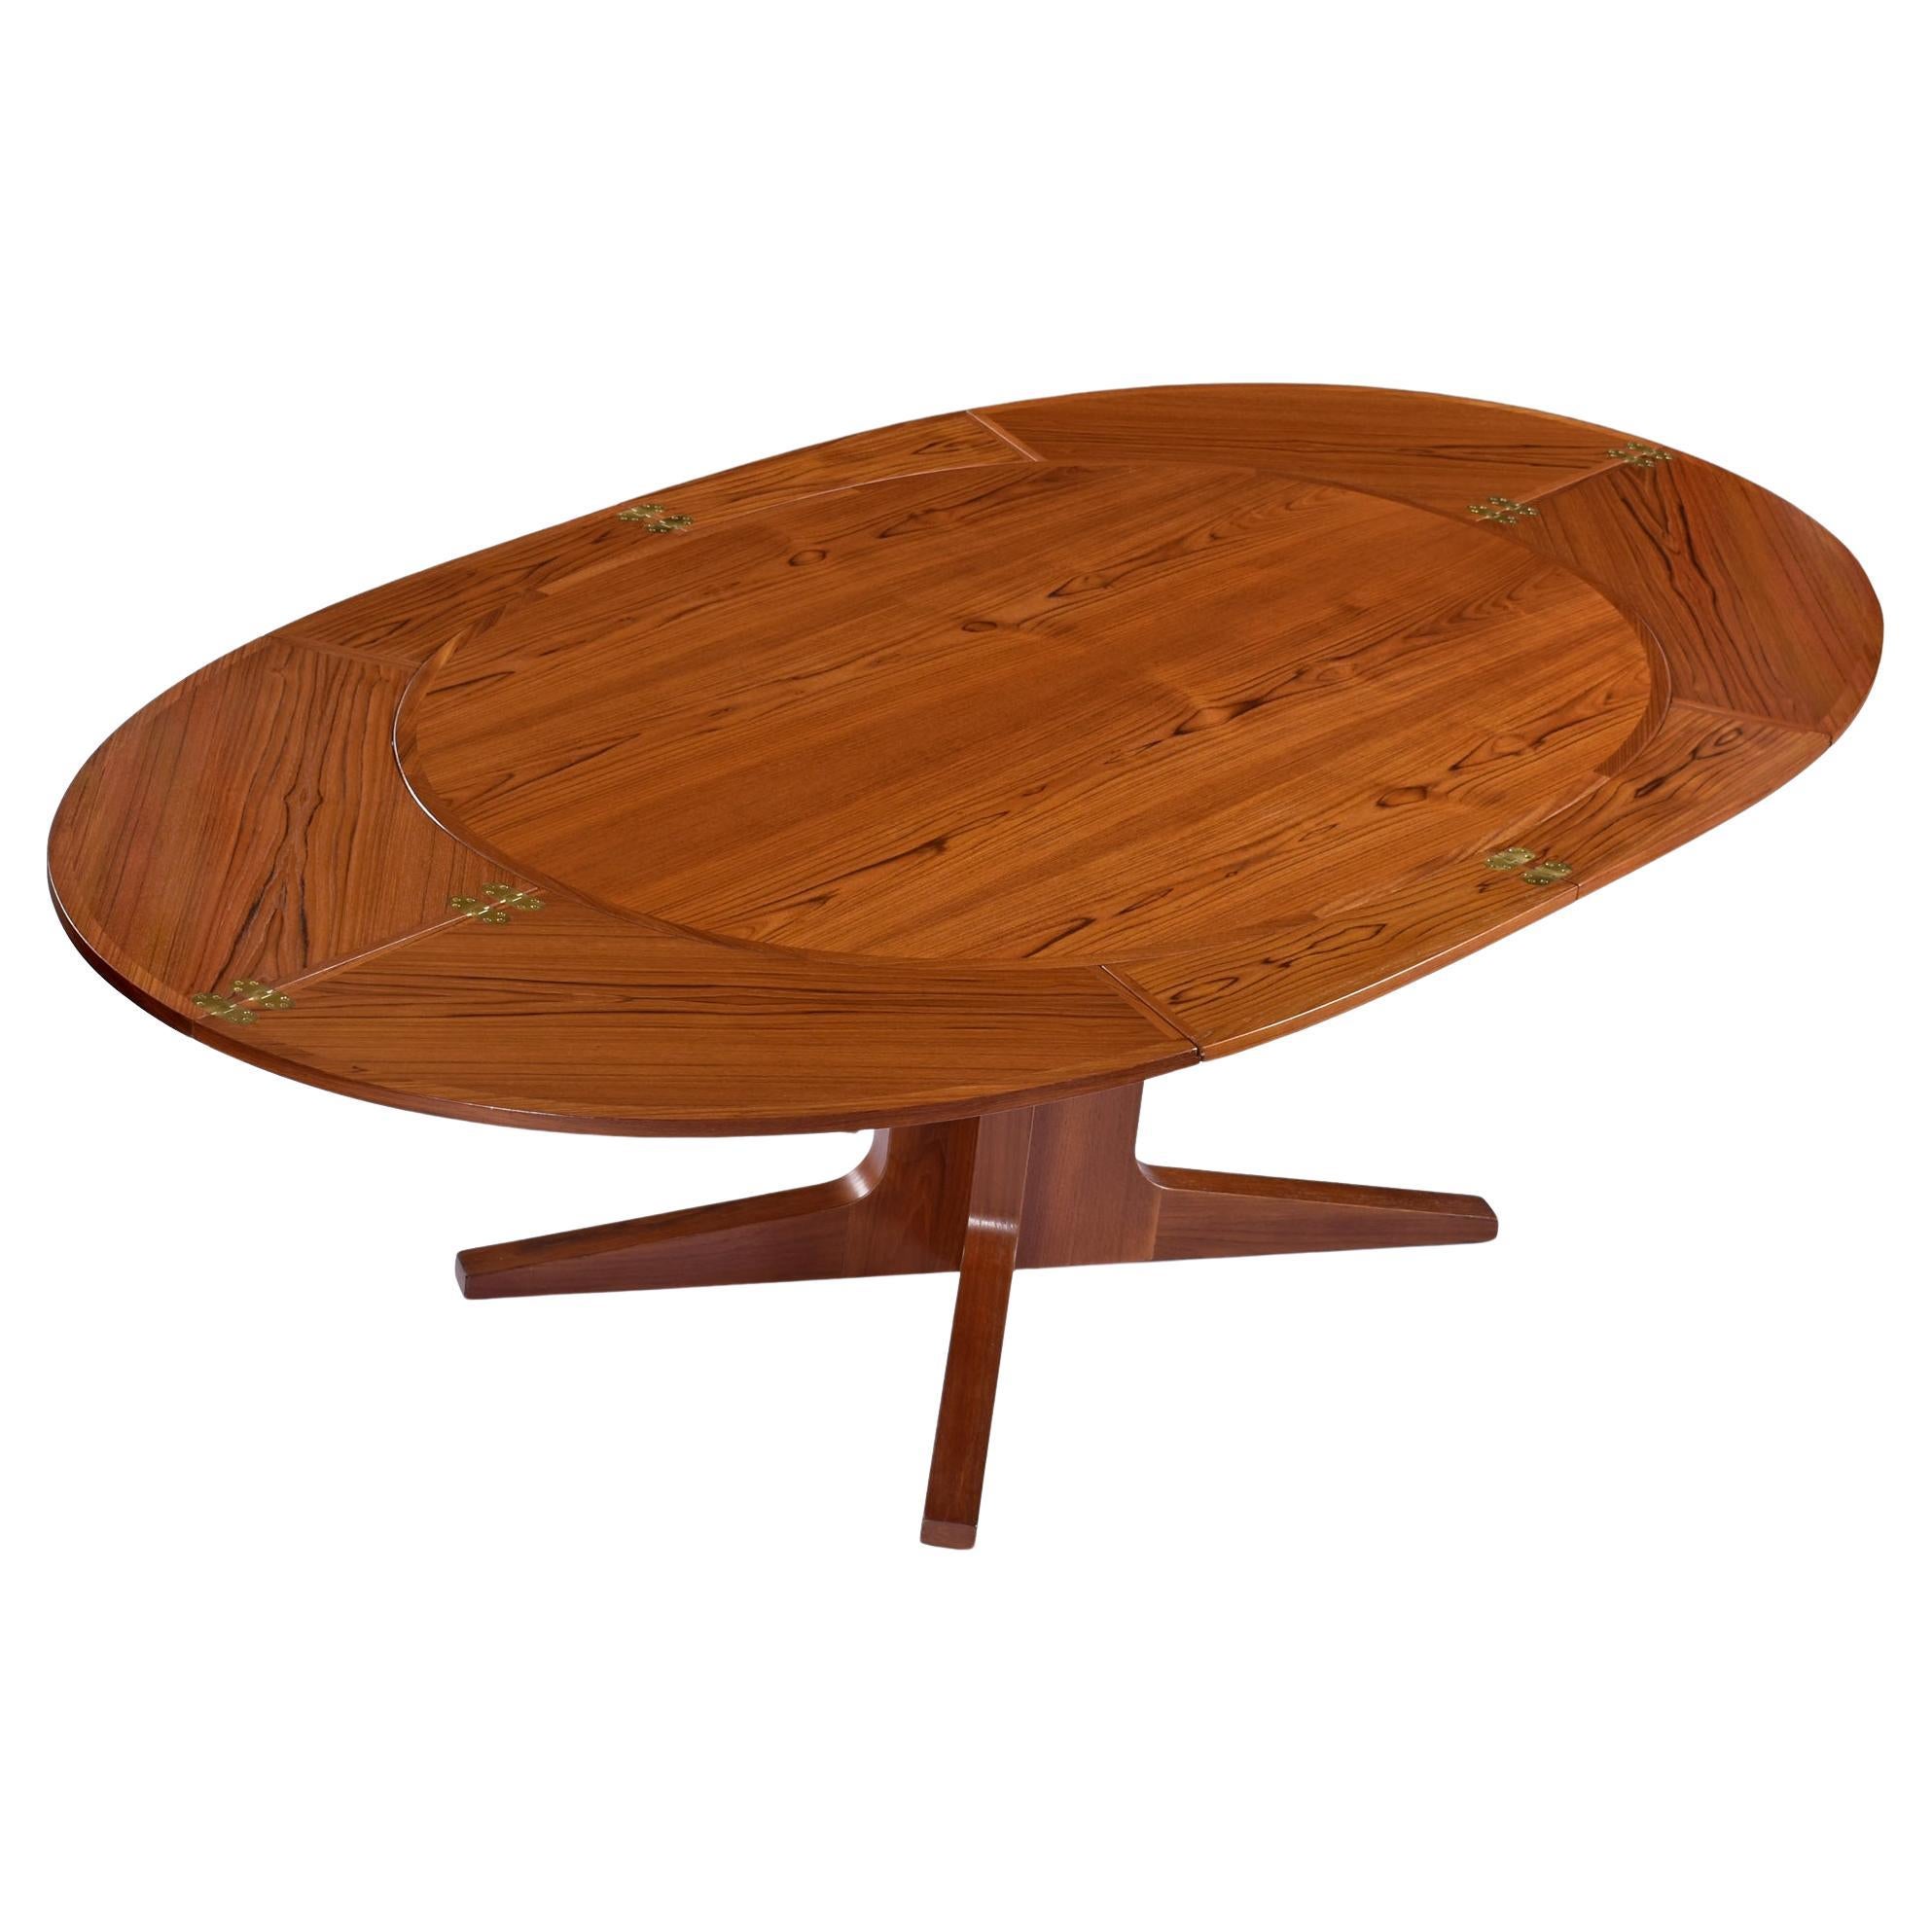 Danish Teak Flip-Flap Oval Lotus Expanding Dining Table by Dyrlund For Sale